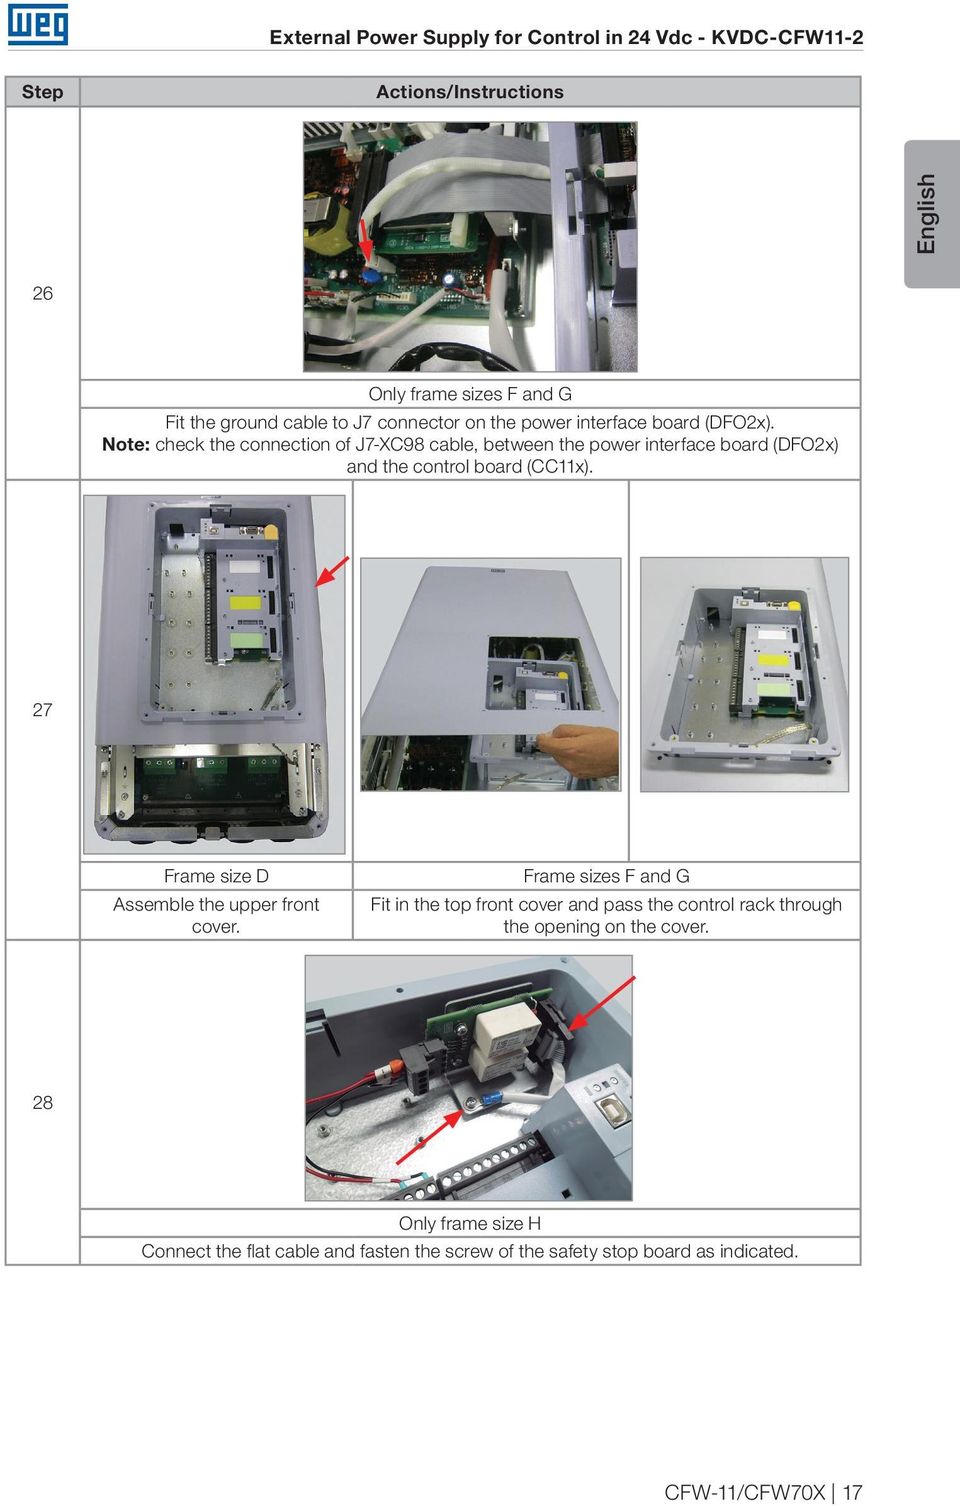 Note: check the connection of J7-XC98 cable, between the power interface board (DFO2x) and the control board (CC11x).